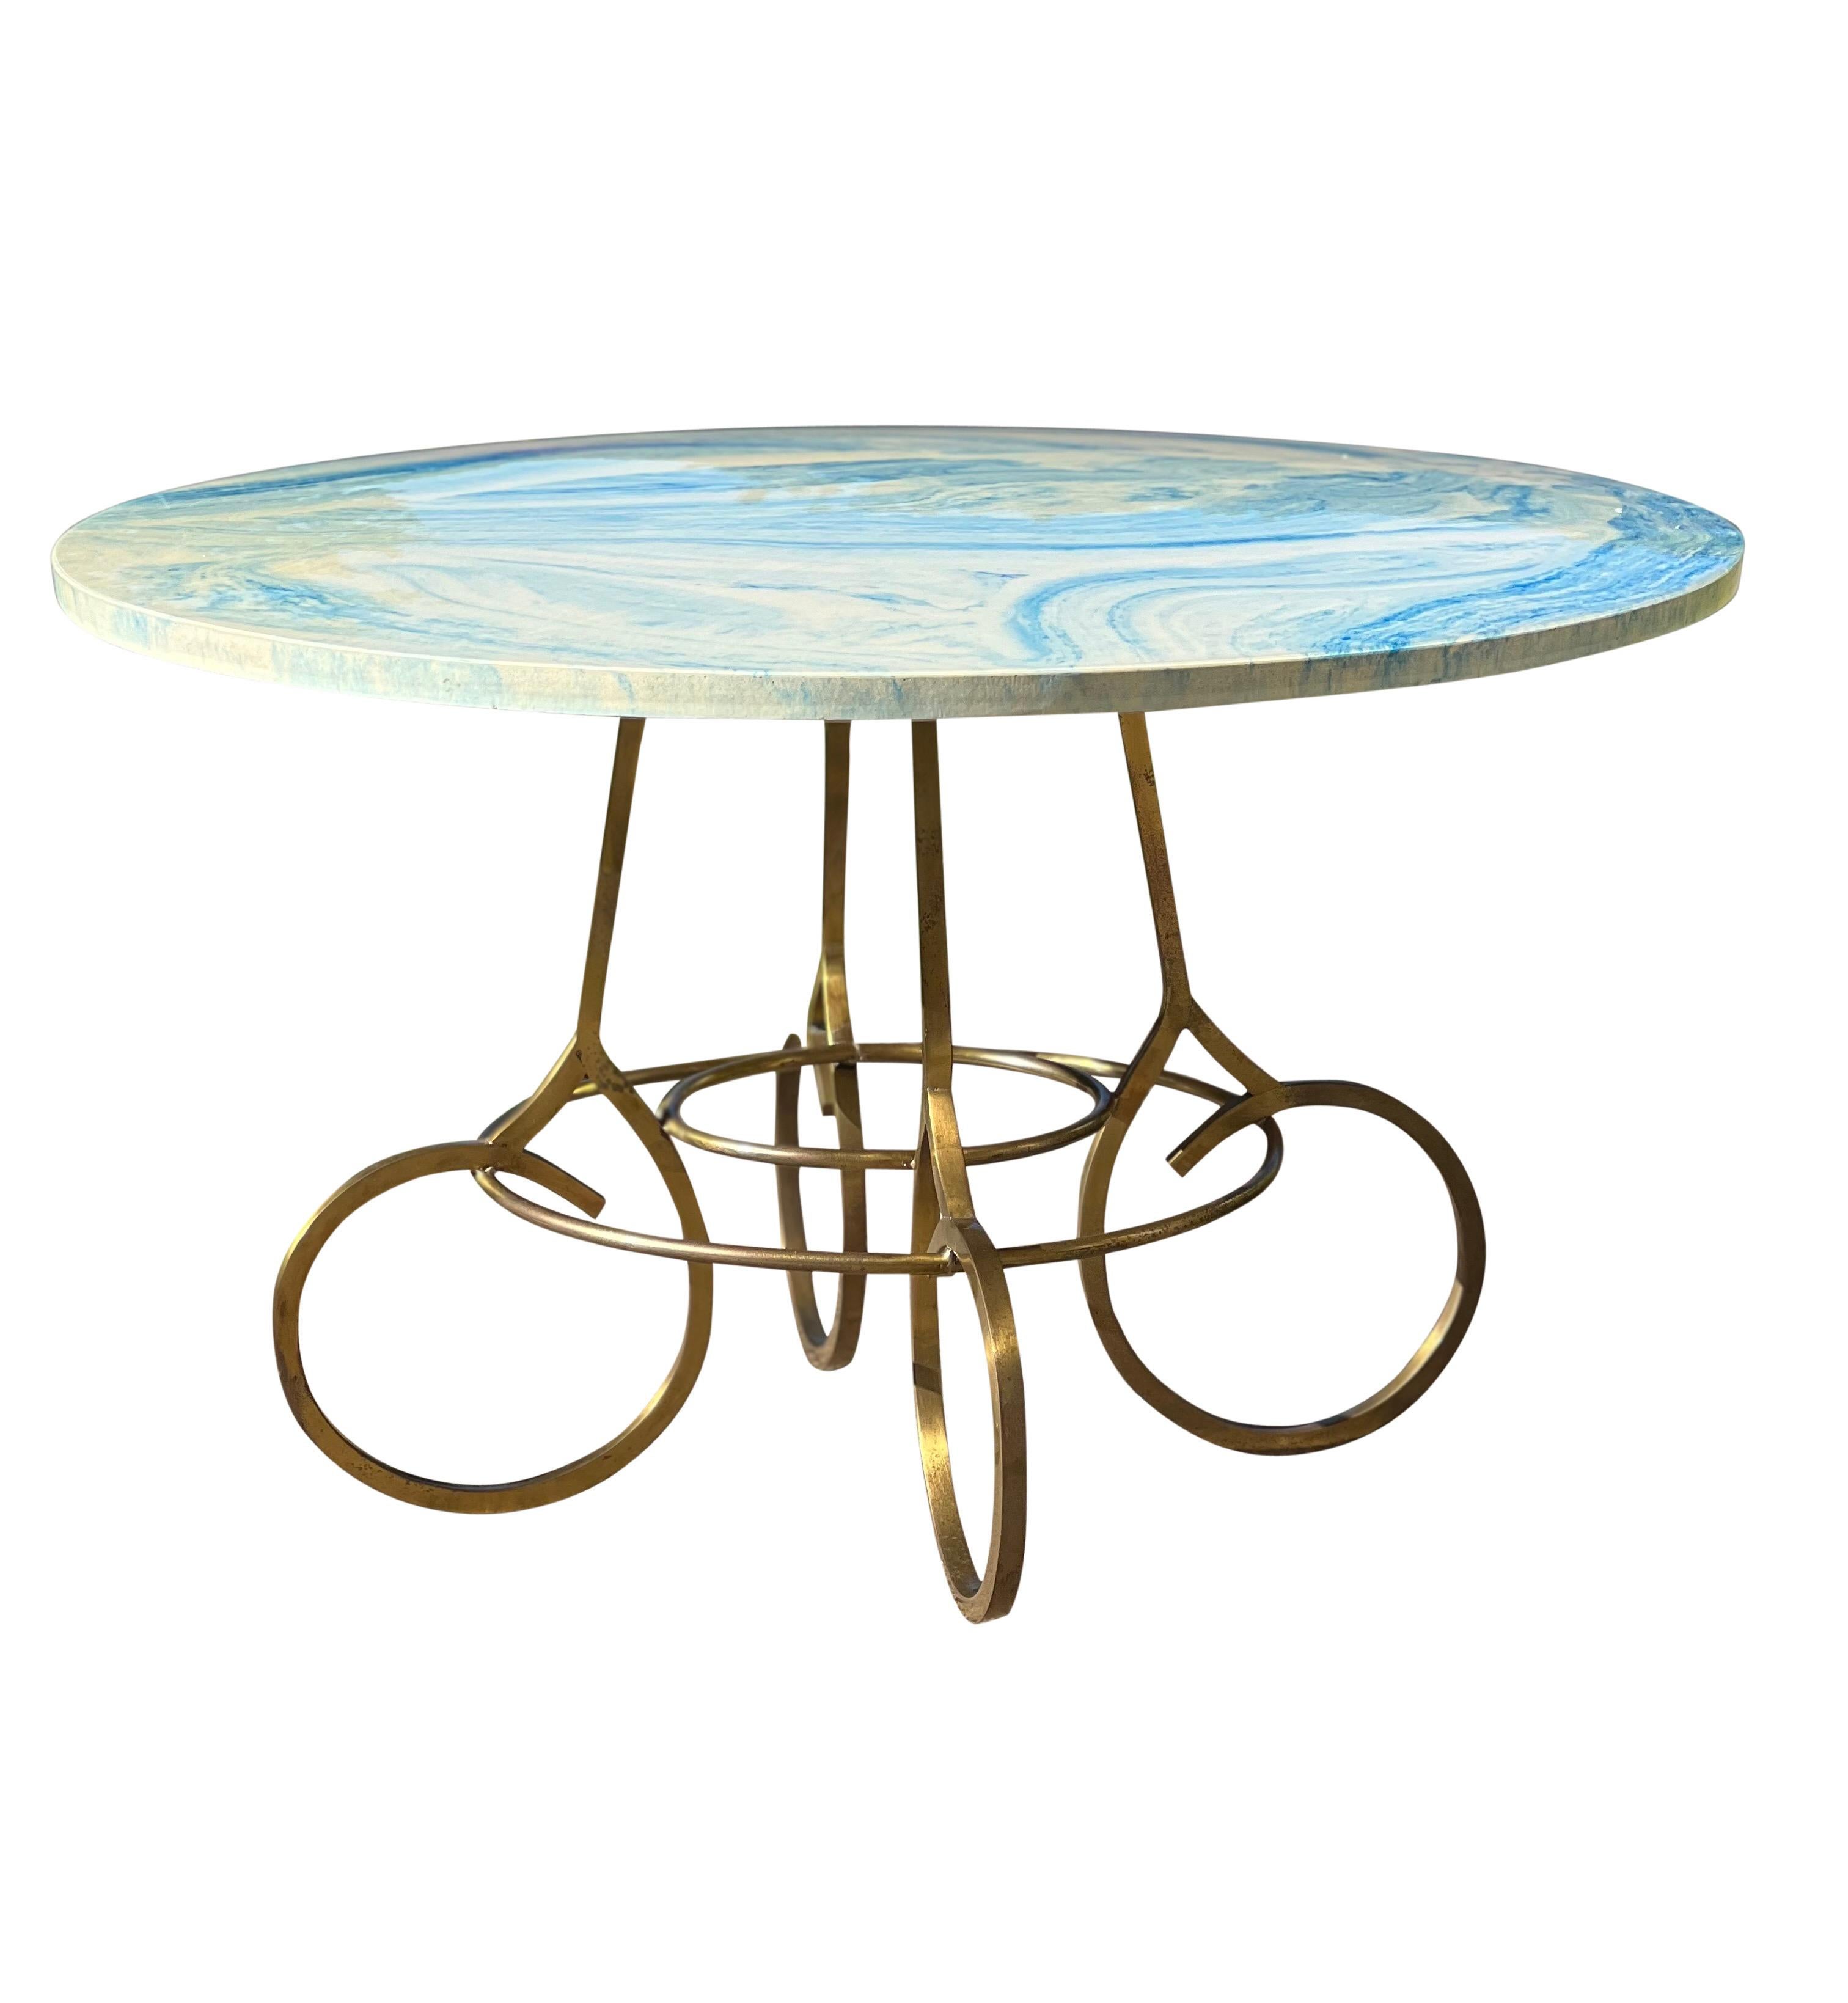 Beautiful French garden small coffee table, 1960's. 

The top is crafted of composite stone with a marbled coating in calming shades of turquoise and cream on an elegant brass base. Fabulous anywhere, this is an exceptional table.